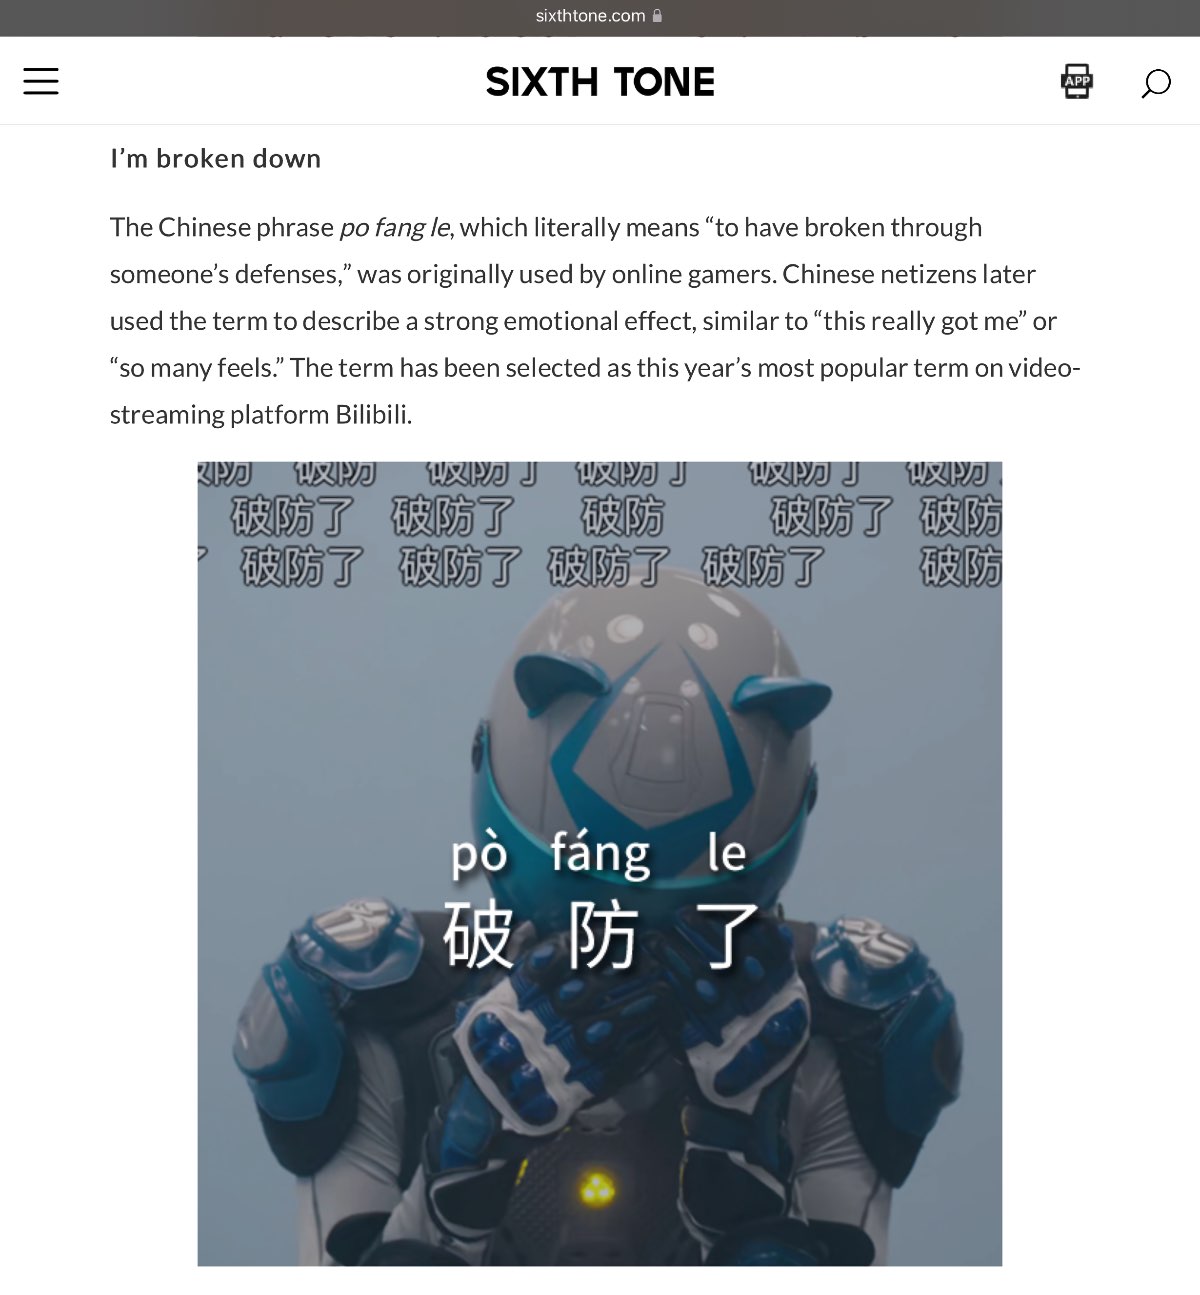 screenshot of Sixth Tone article discussing “_pòfáng_”